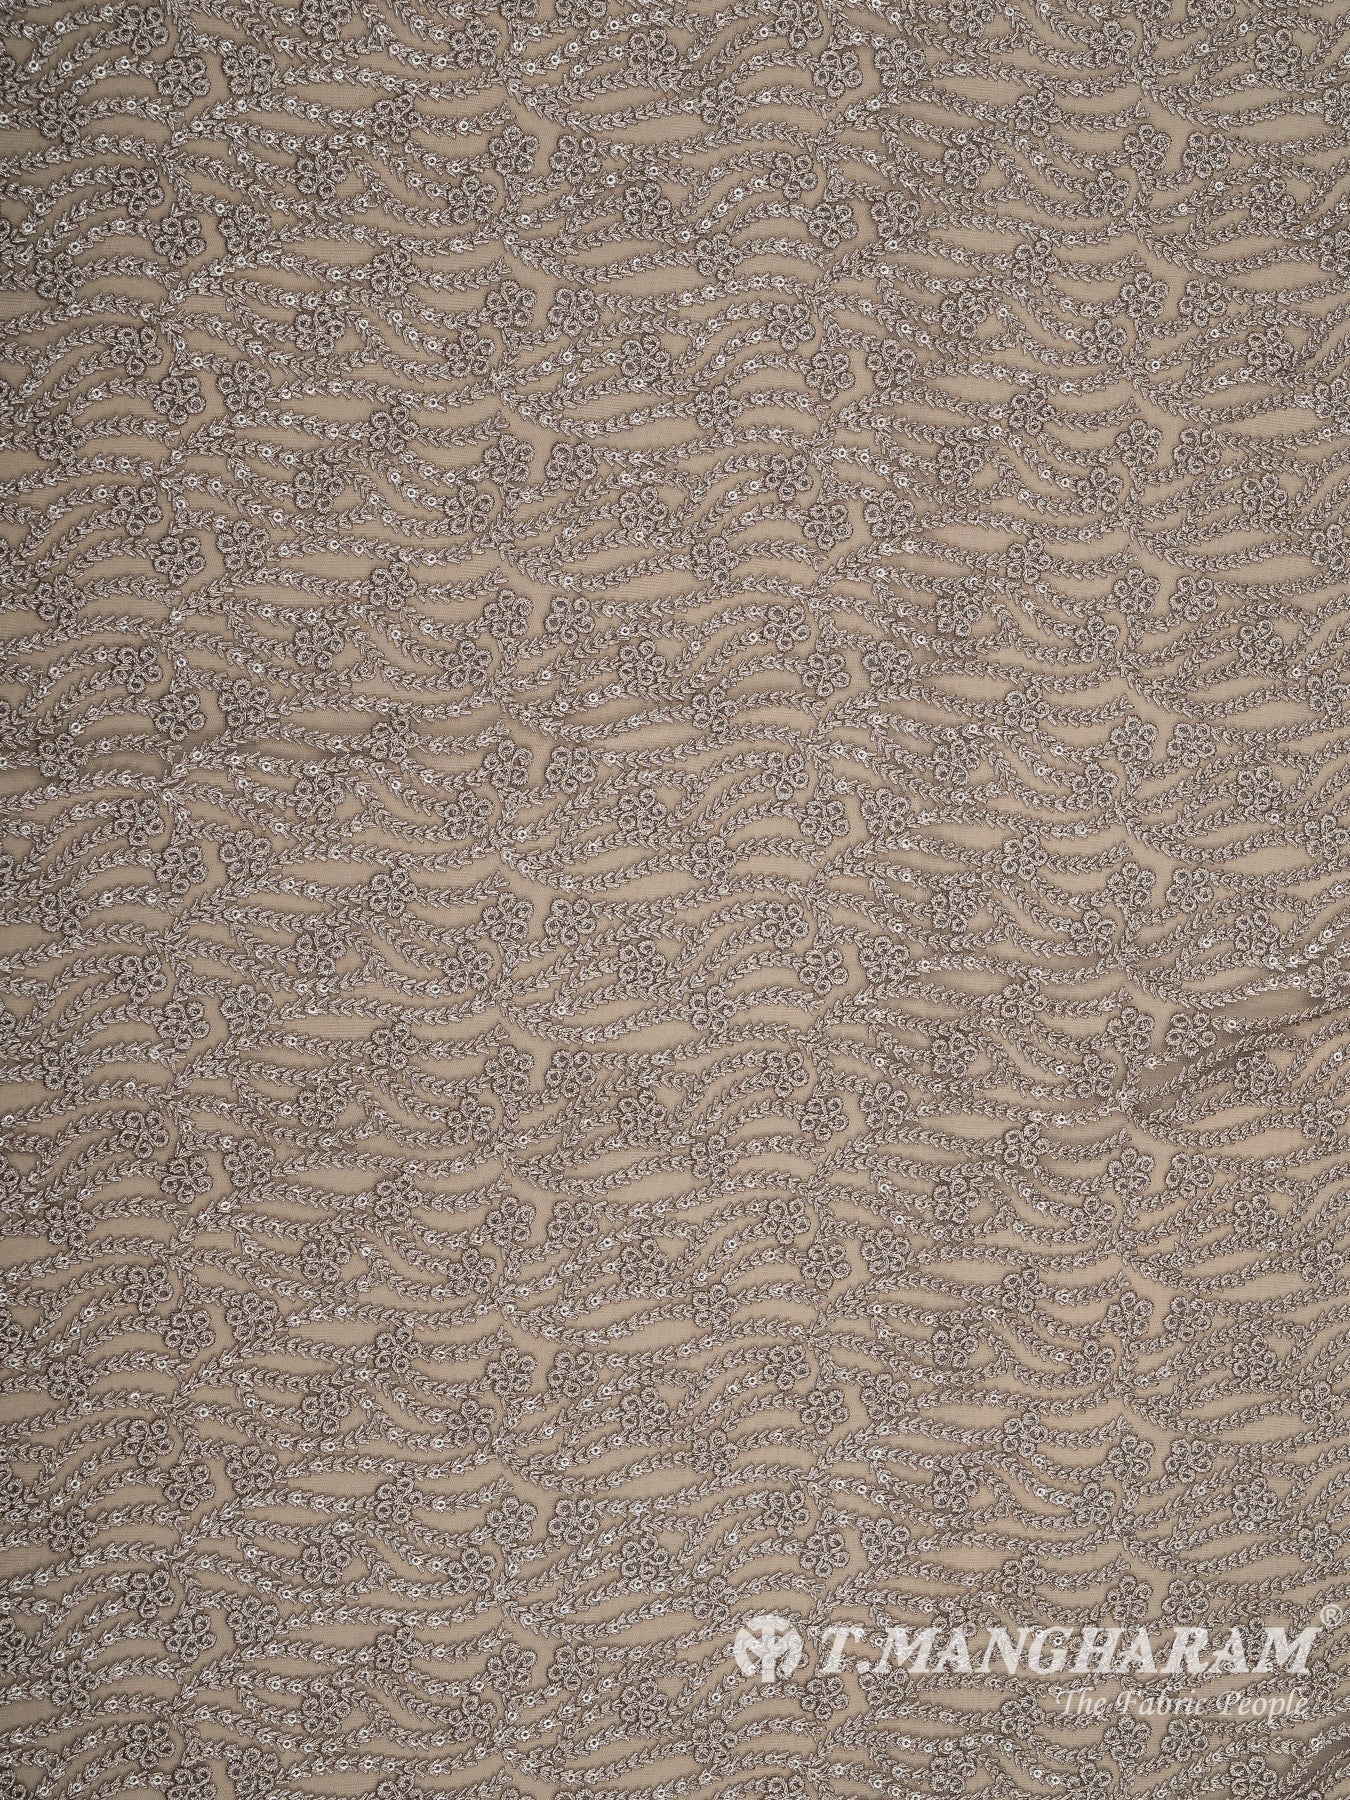 Beige Net Embroidery Fabric - EC8428 view-3